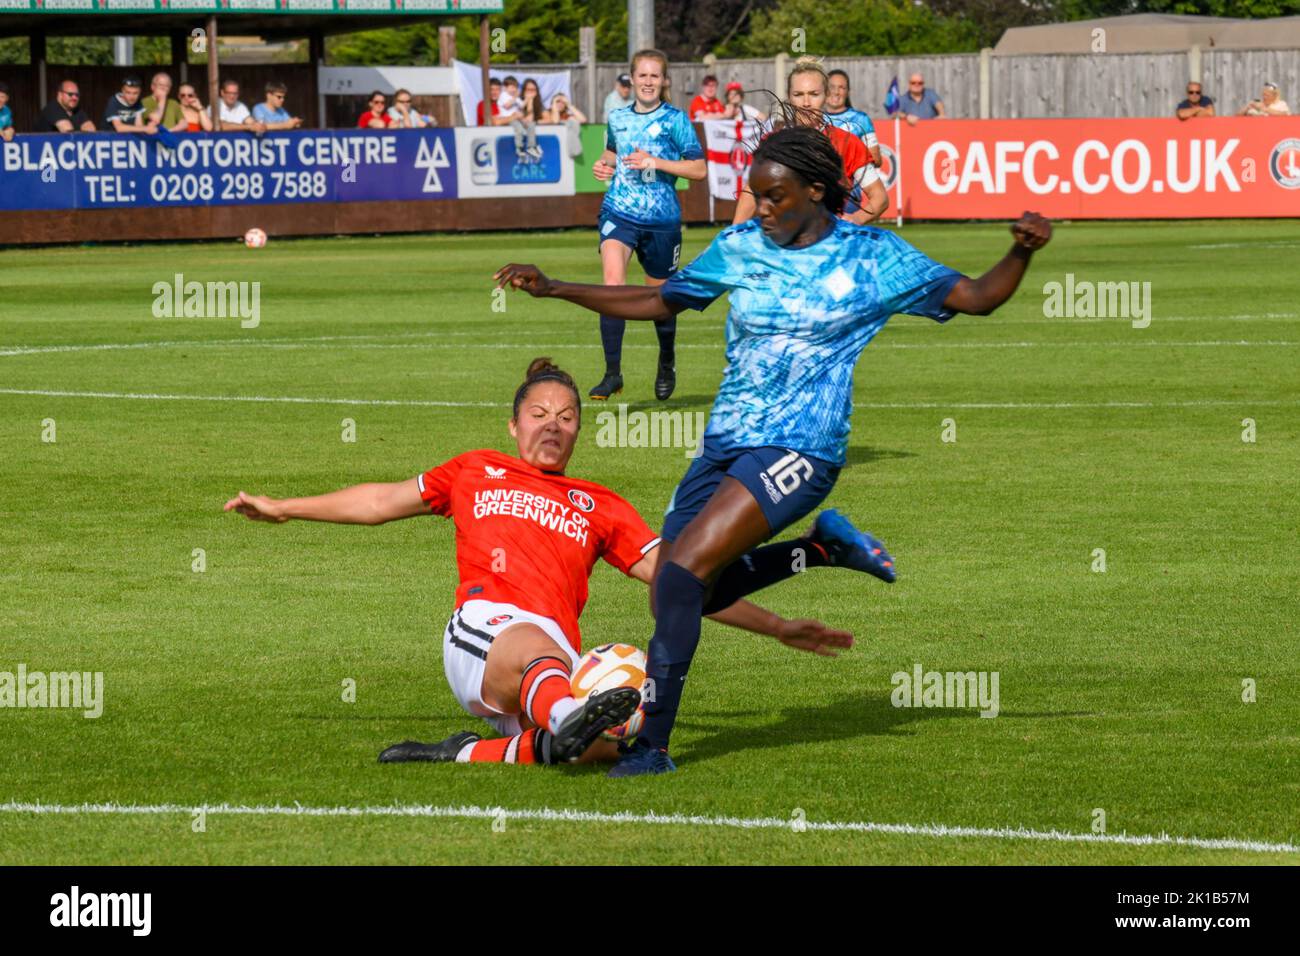 Crayford, UK. 28th Aug, 2022. Crayford, England, August 28th 2022: Hannah Godfrey (25 Charlton Athletic) tackling Karin Muya (16 London City Lionesses) during the Barclays FA Womens Championship game between Charlton Athletic and London City Lionesses at The Oakwood in Crayford, England. (Dylan Clinton/SPP) Credit: SPP Sport Press Photo. /Alamy Live News Stock Photo